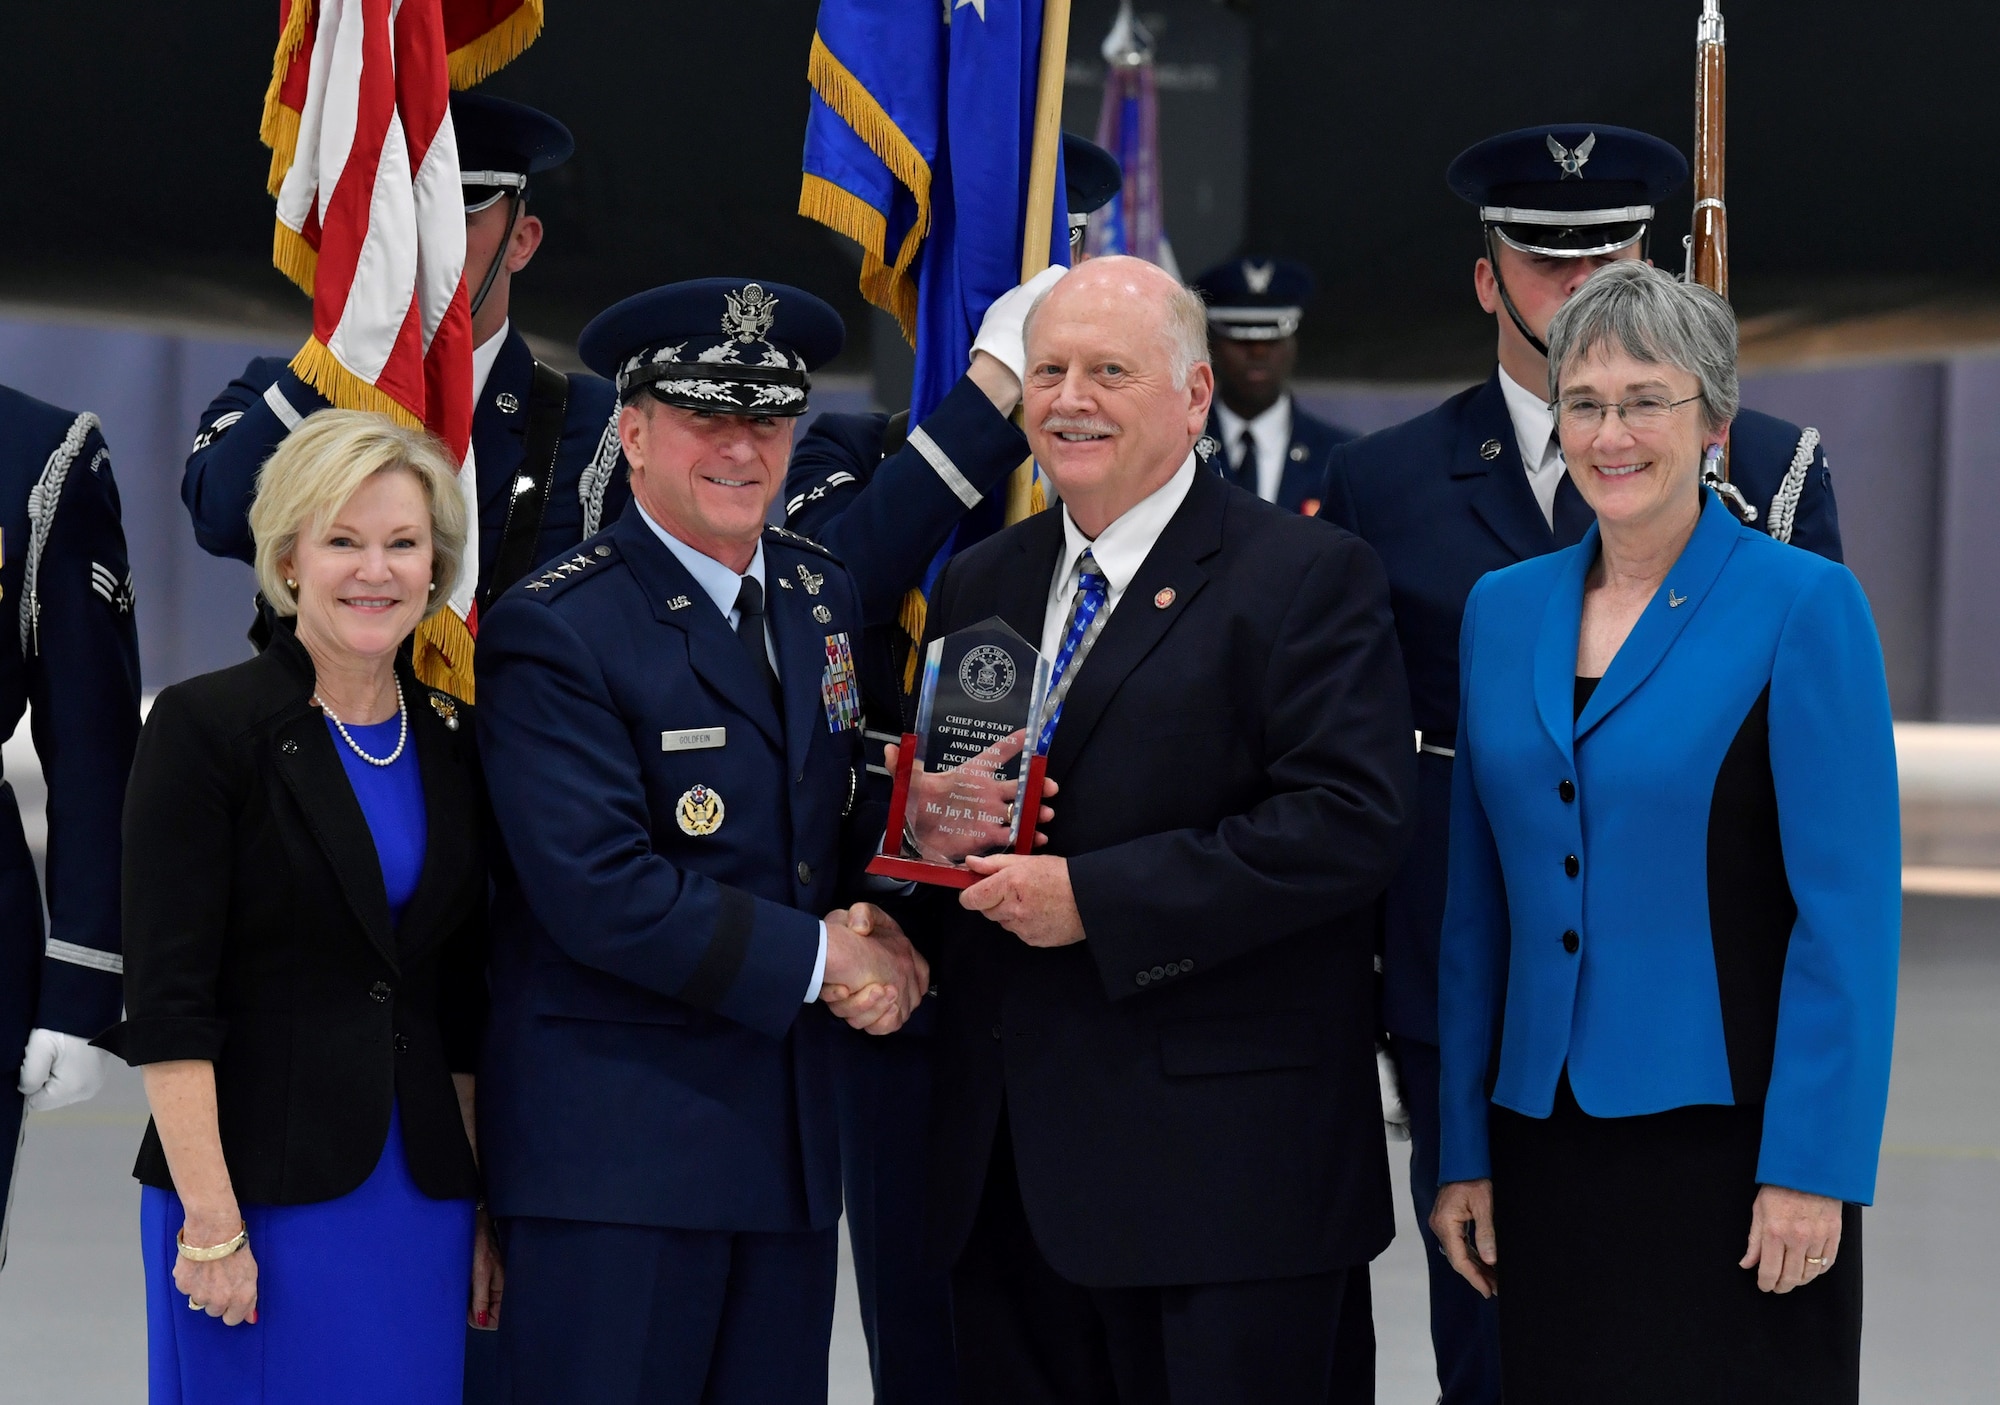 Jay Hone, spouse of Secretary of the Air Force Heather Wilson, is presented an award by Air Force Chief of Staff Gen. David L. Goldfein during the SECAF's farewell ceremony at Joint Base Andrews, Maryland, May 21, 2019.